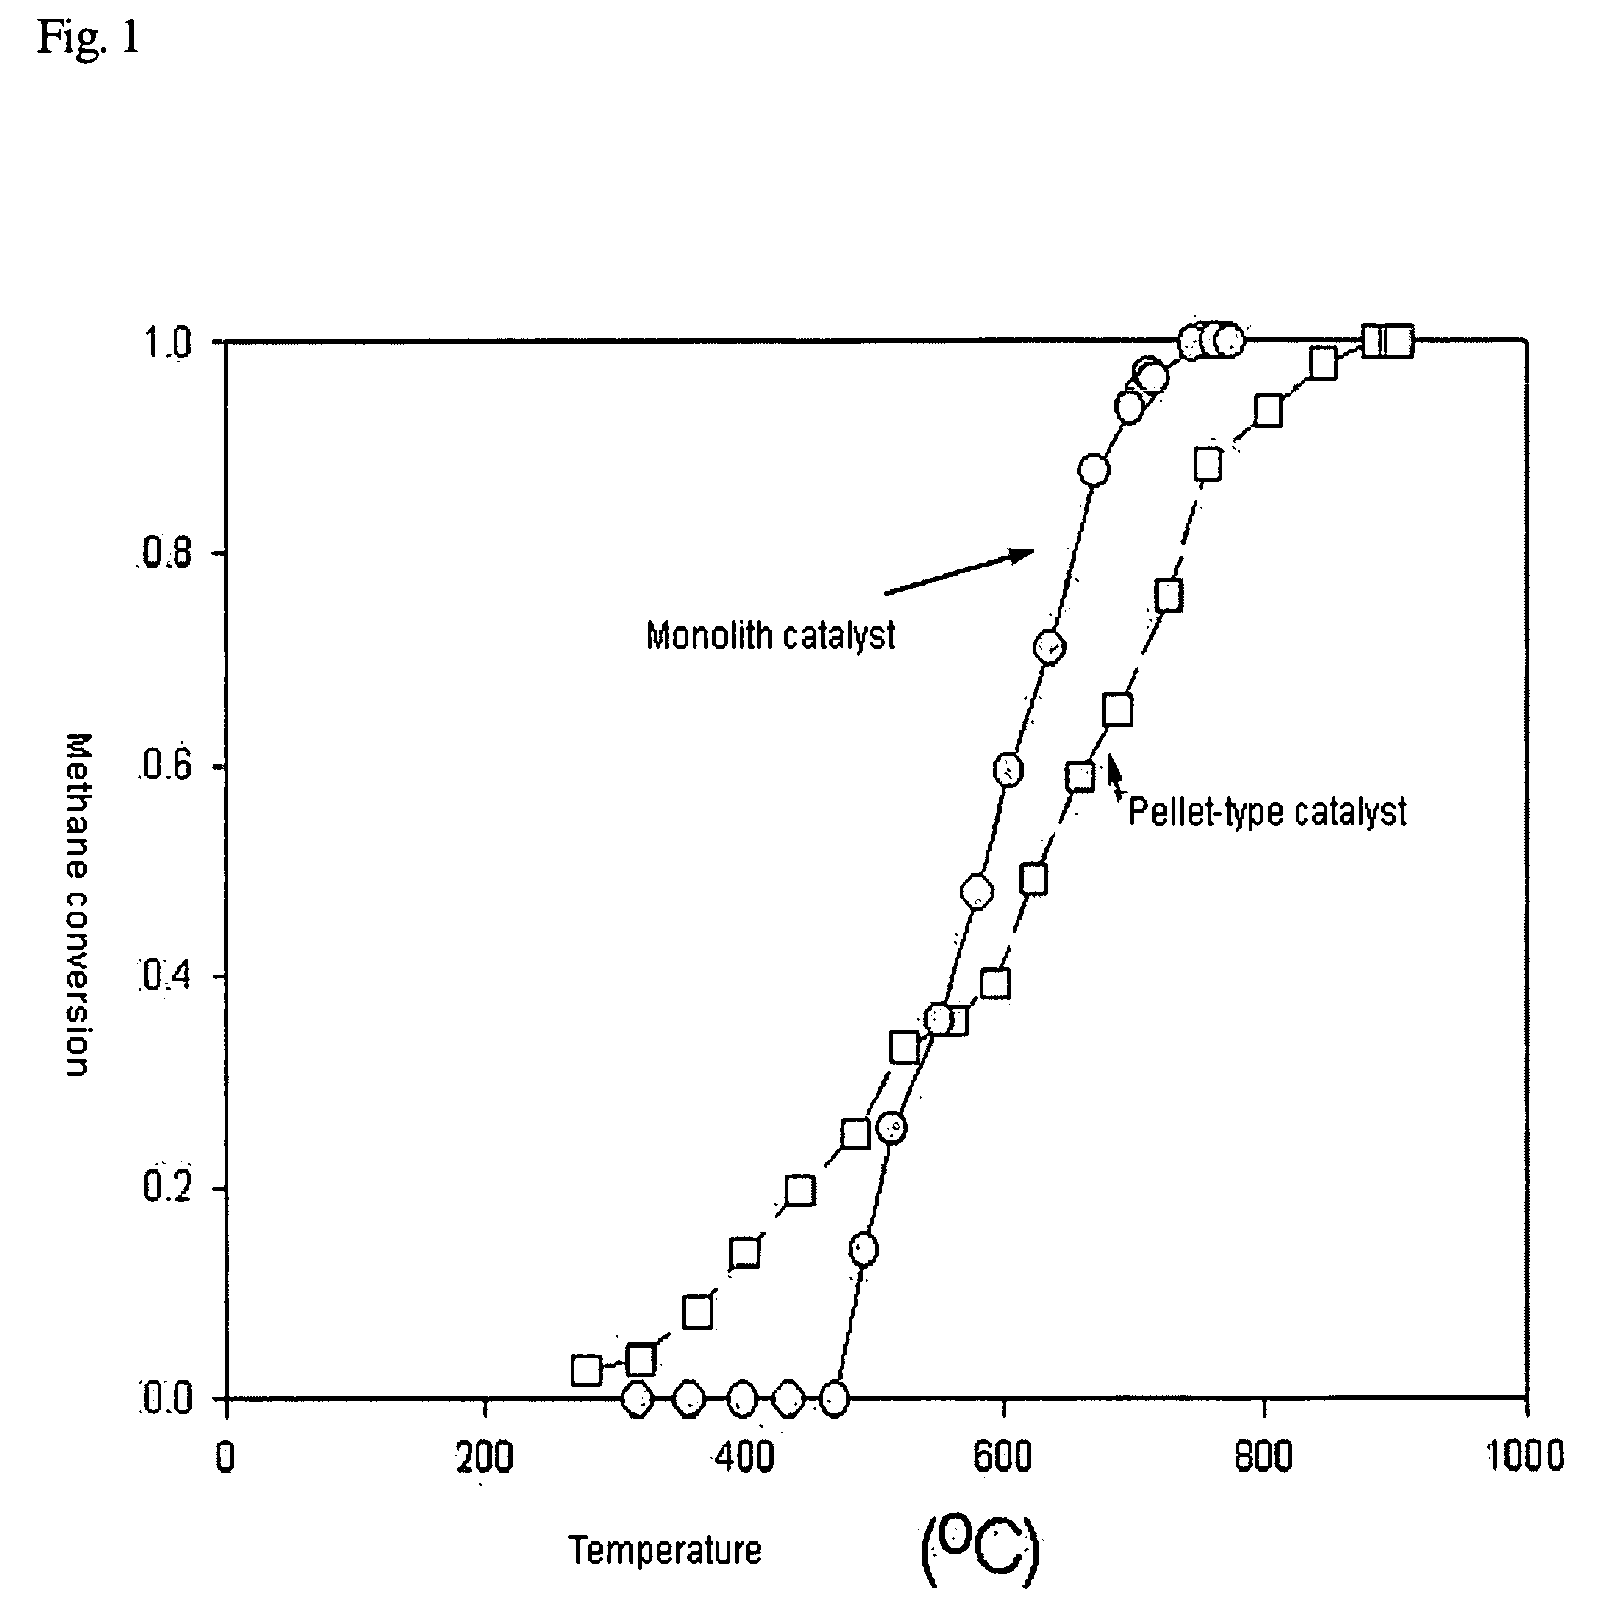 Compact steam reformer with metal monolith catalyst and method of producing hydrogen using the same